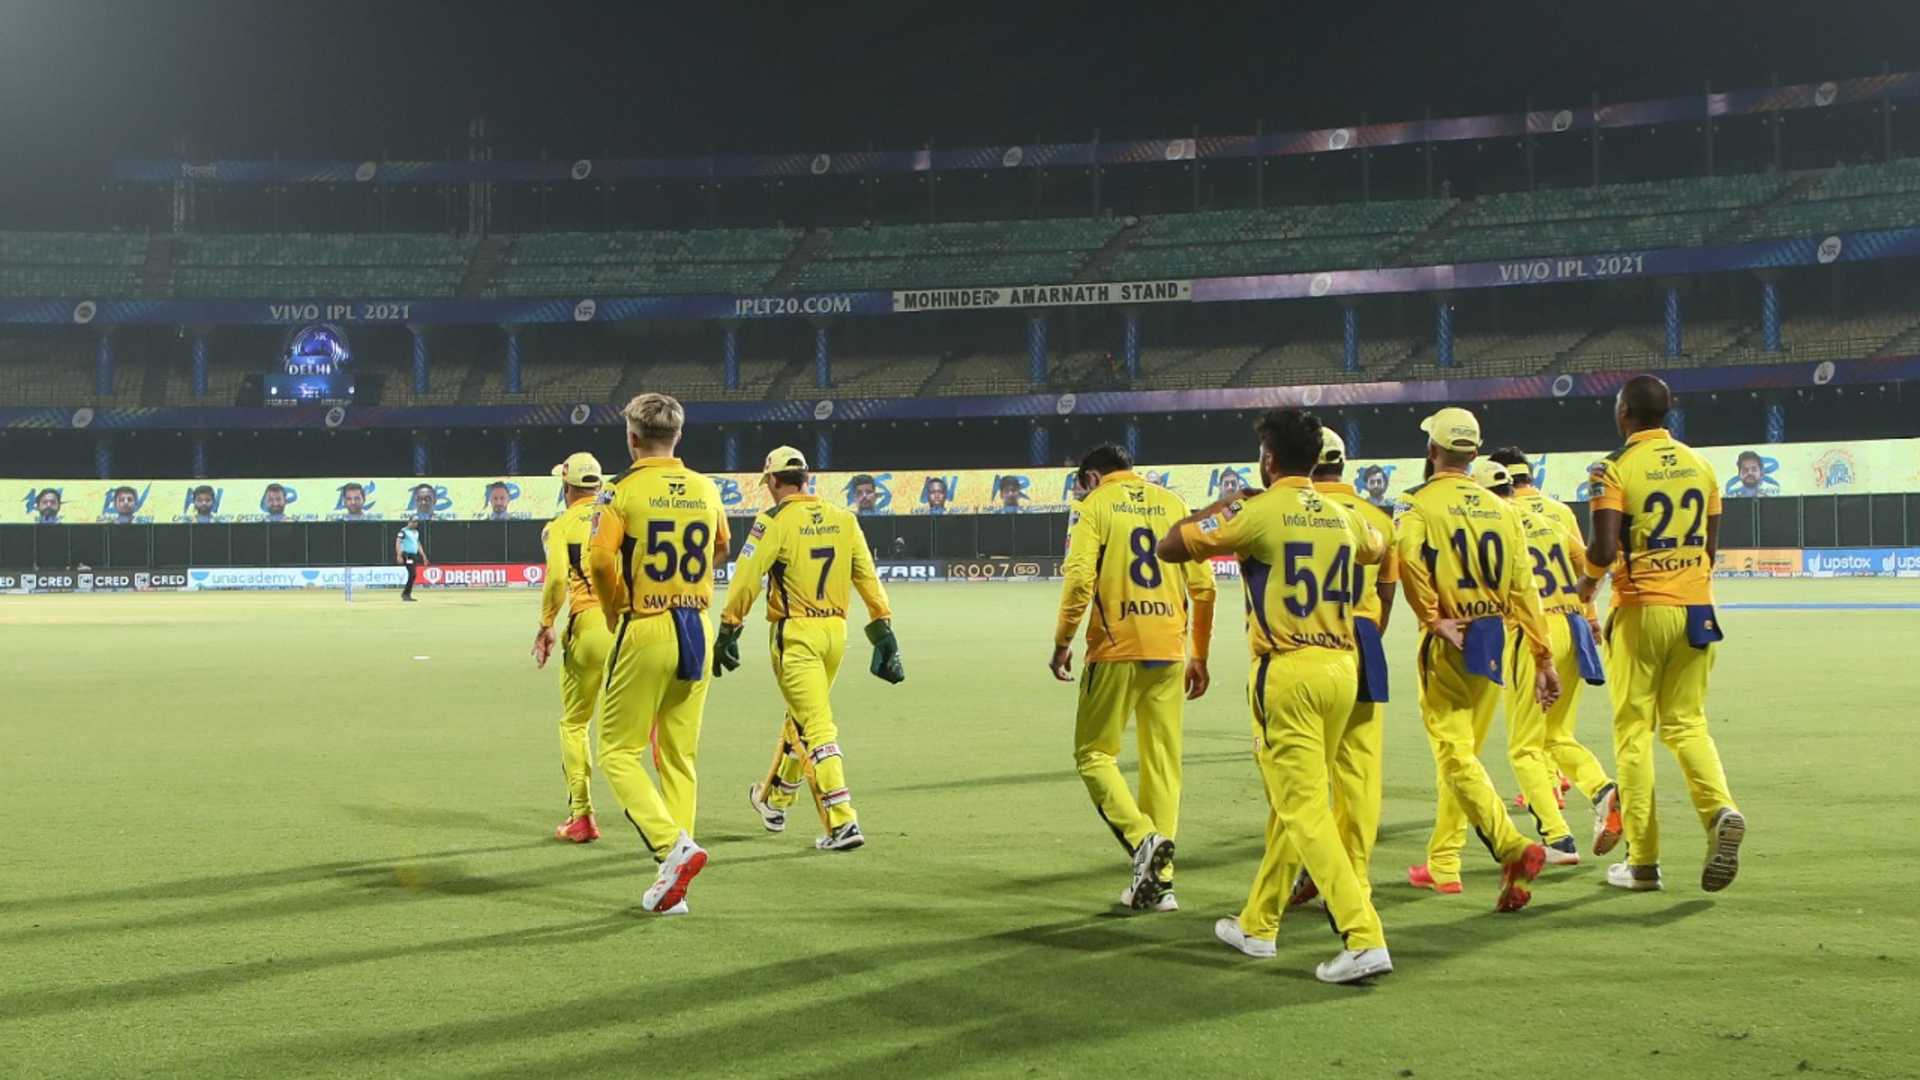 Chennai Super Kings are in prime form, Image Credit: Twitter/@ChennaiIPL